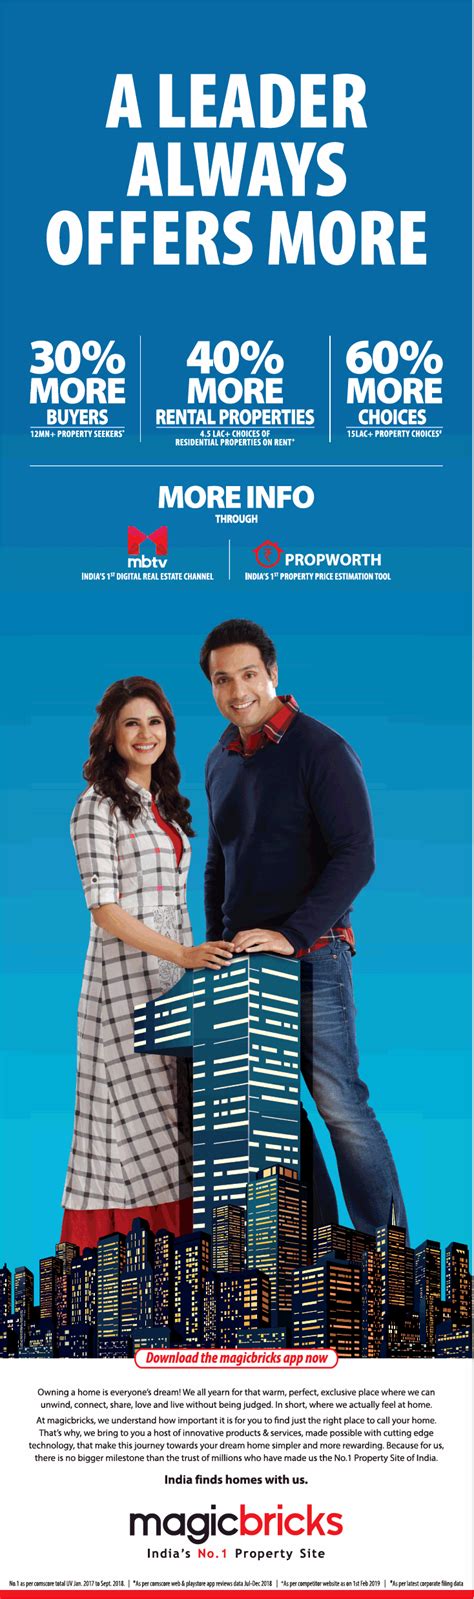 magicbricks indias no 1 property site a leader always offers more ad advert gallery